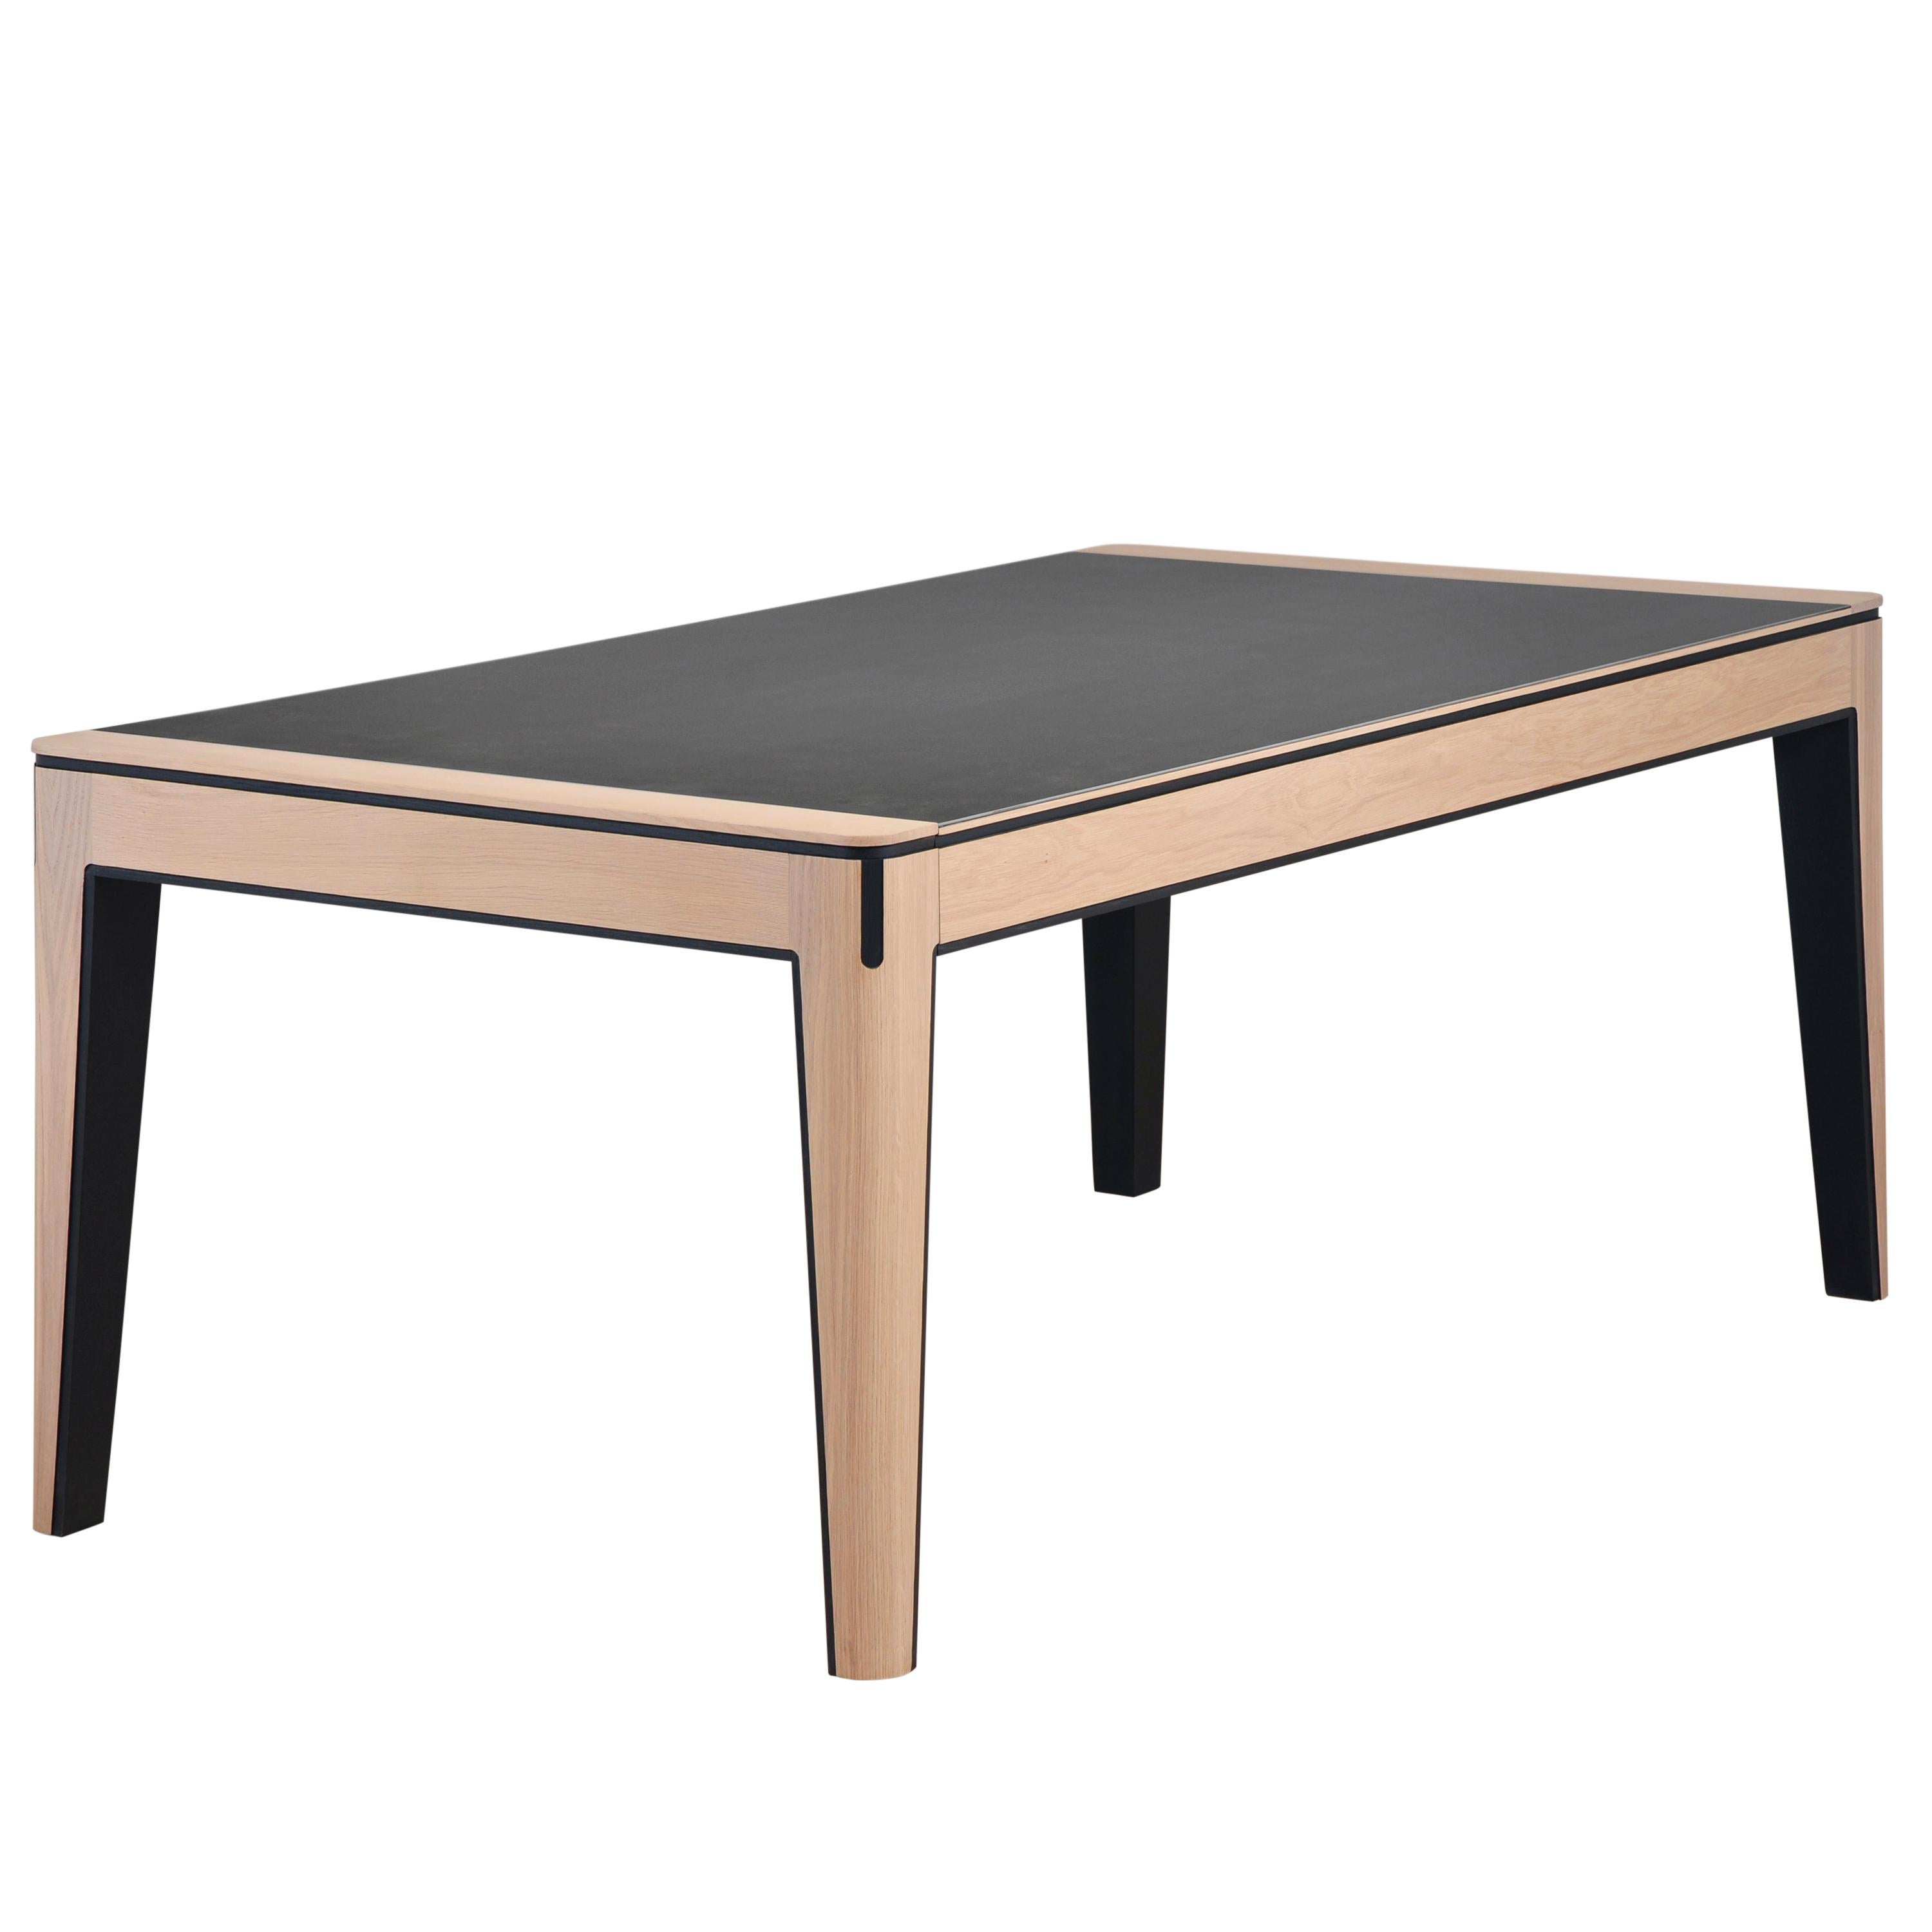 Solid oak & ceramic top extensible table, design by Christophe Lecomte  